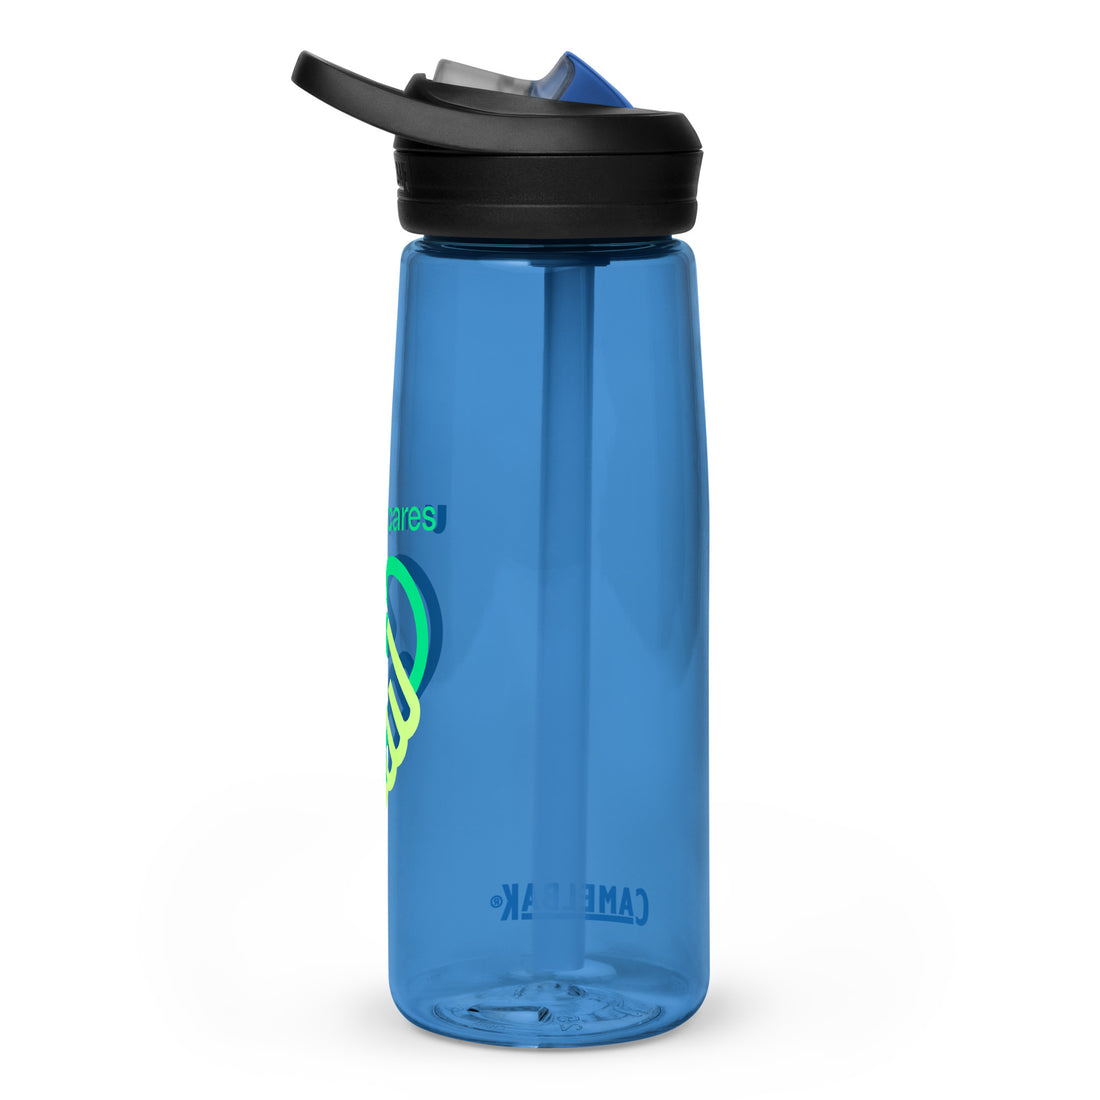 Unisys Cares Water Bottle